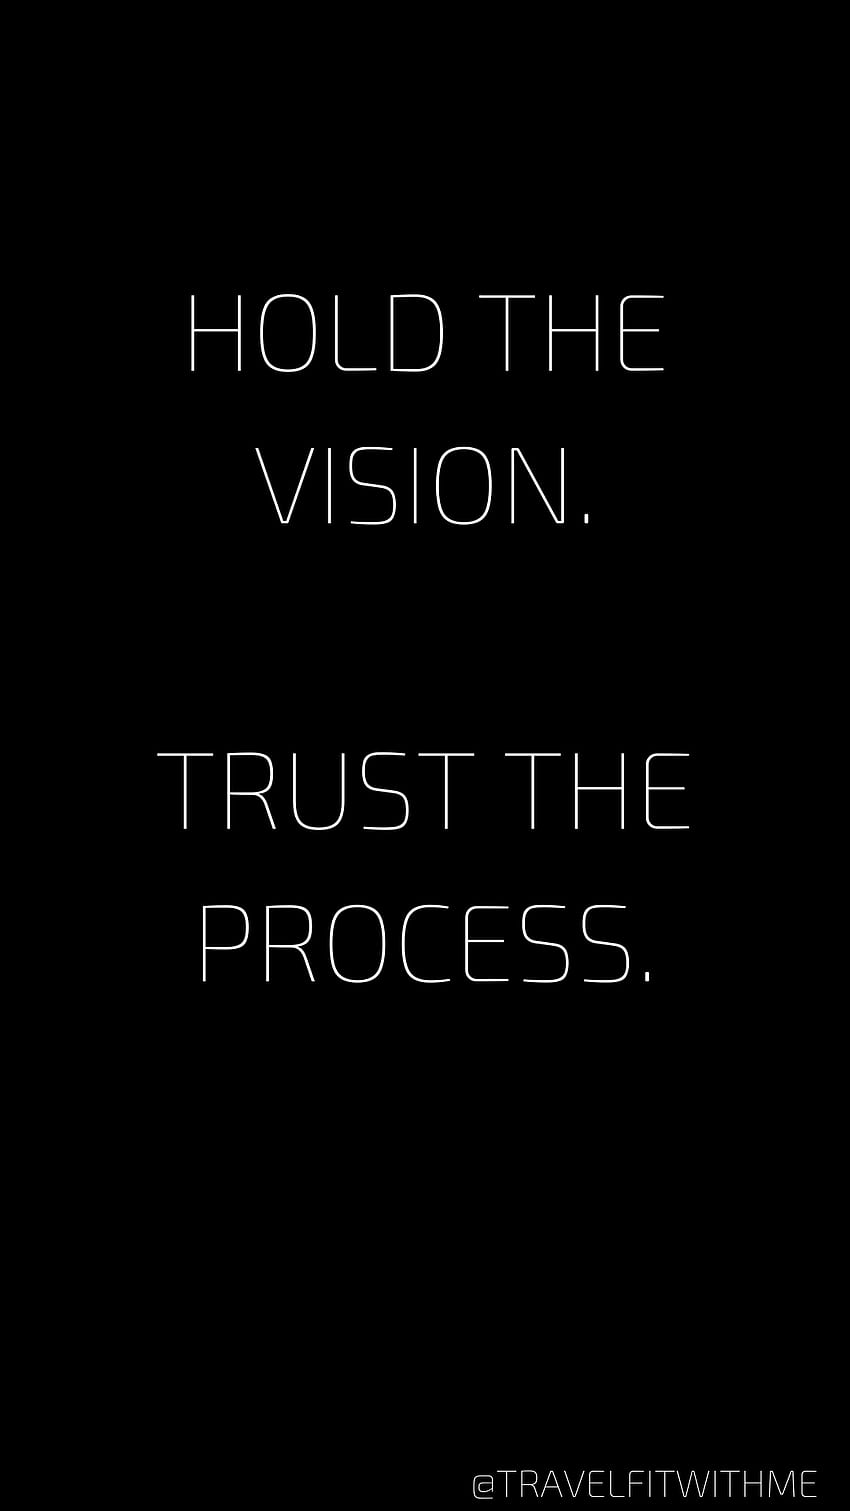 TRUST THE PROCESS - MOTIVATION QUOTES DAILY. Motivational quotes, Inspirational words, Wisdom quotes HD phone wallpaper